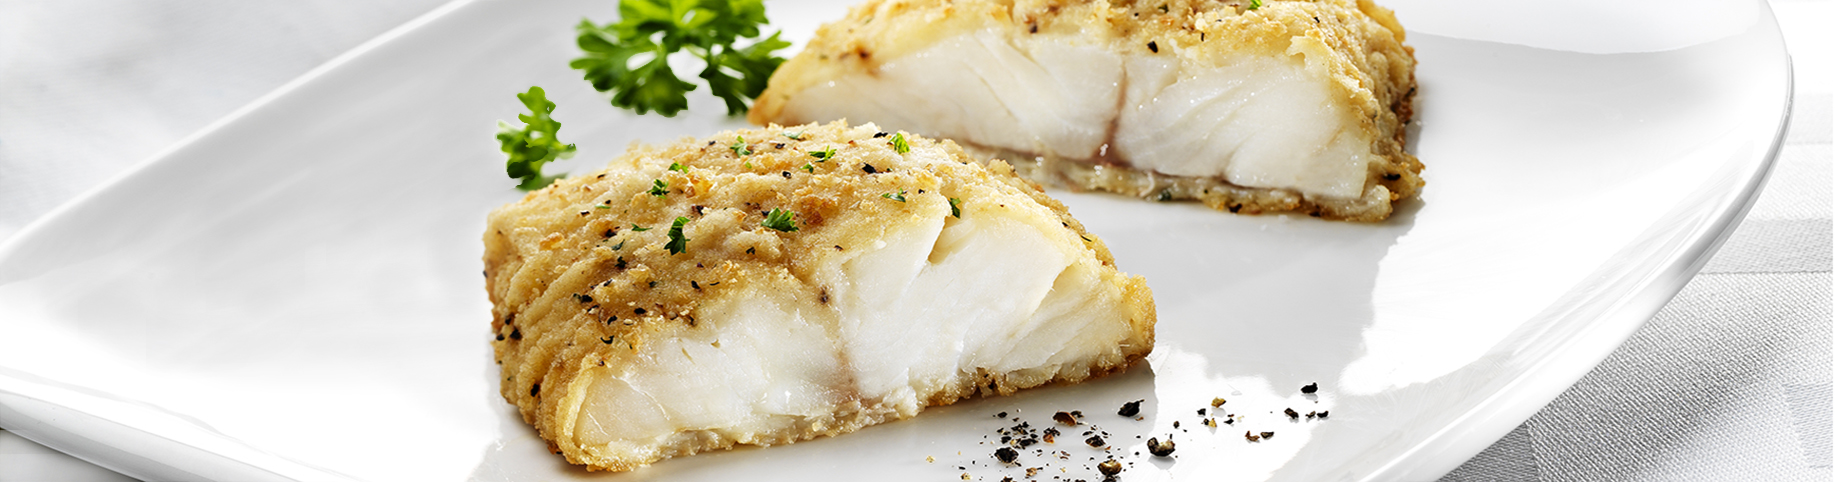 Close up of a crispy and delicious breaded fish fillet.